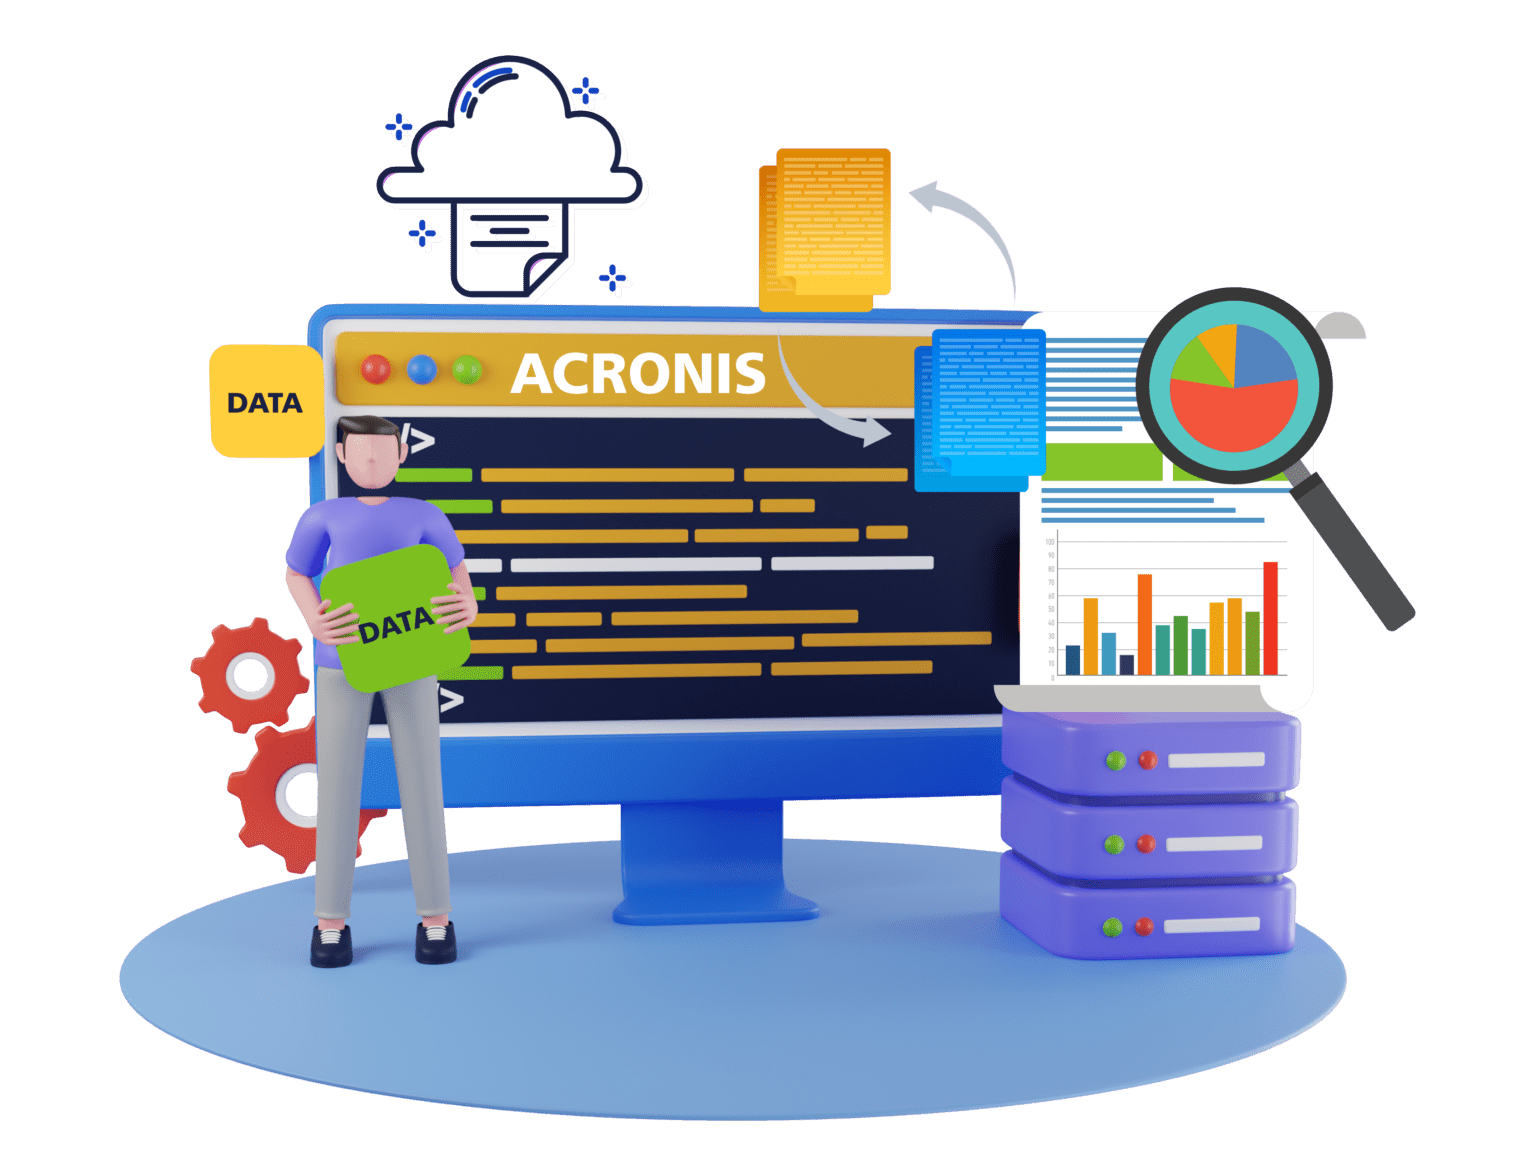 Acronis is an automated Data Backup software